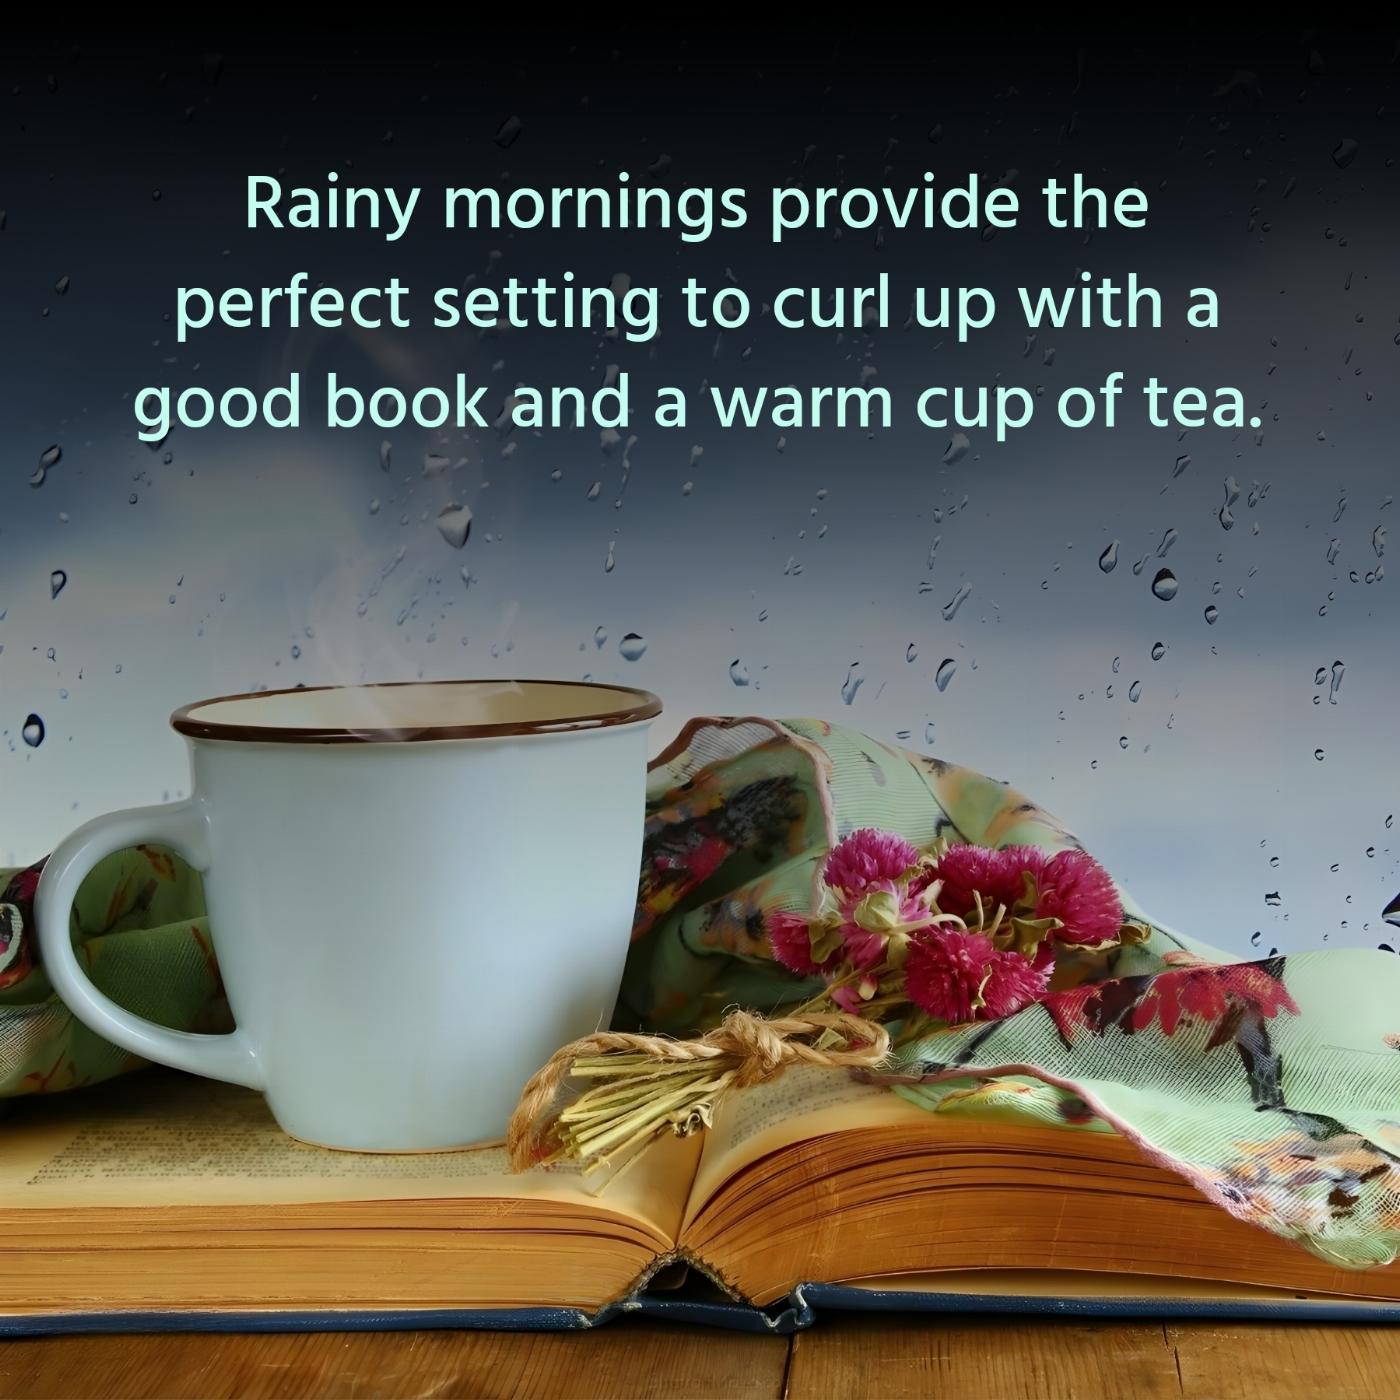 Rainy mornings provide the perfect setting to curl up with a good book